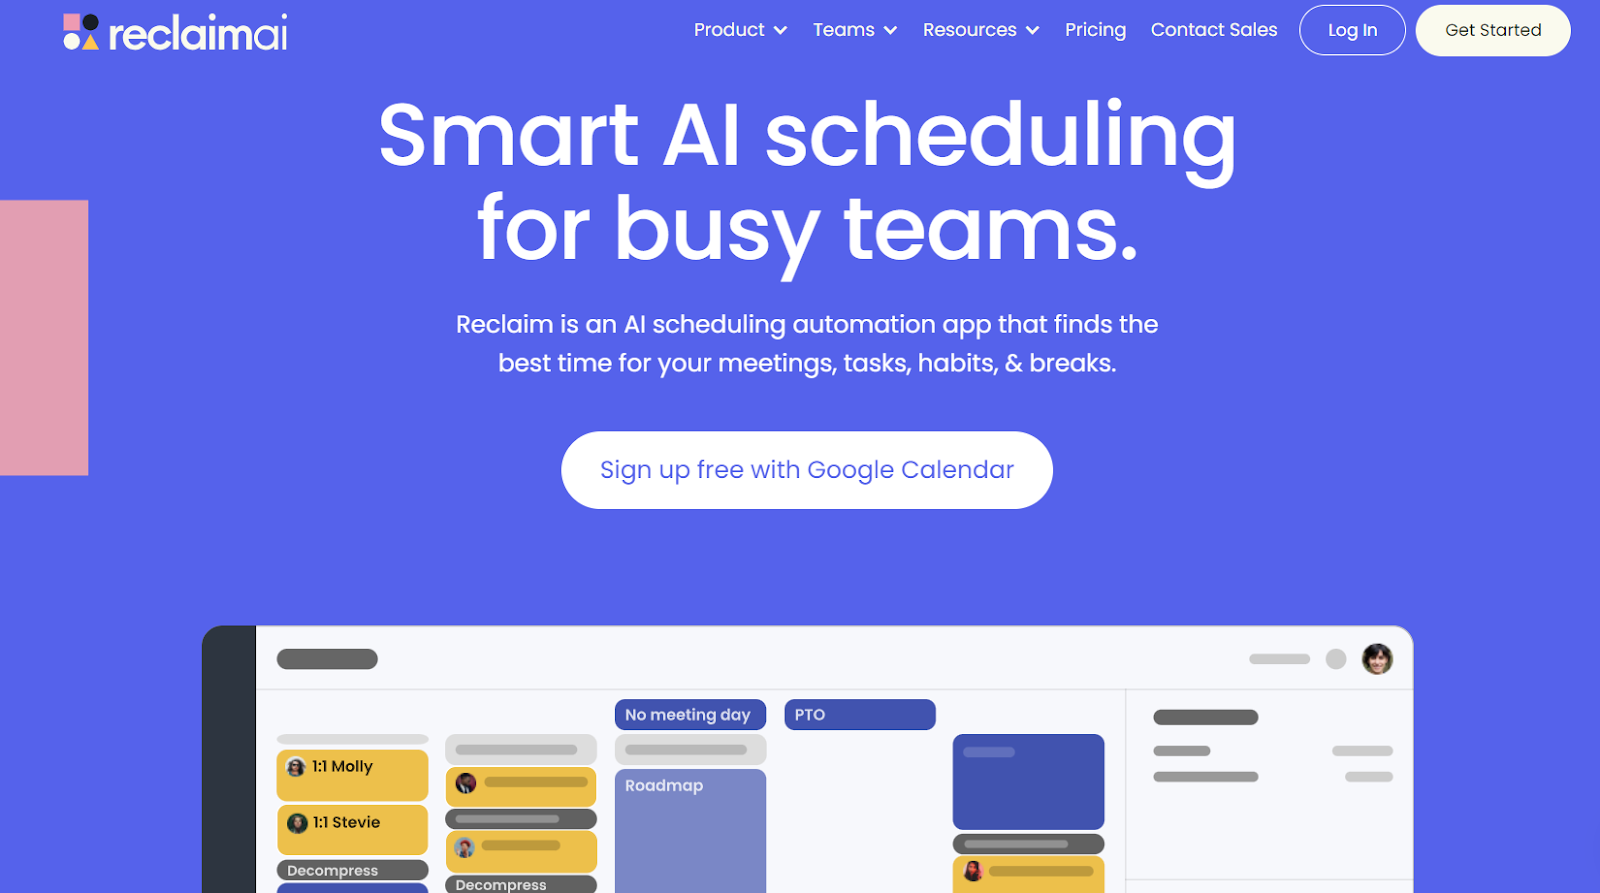 Reclaim.ai Website - Smart AI scheduling for busy teams